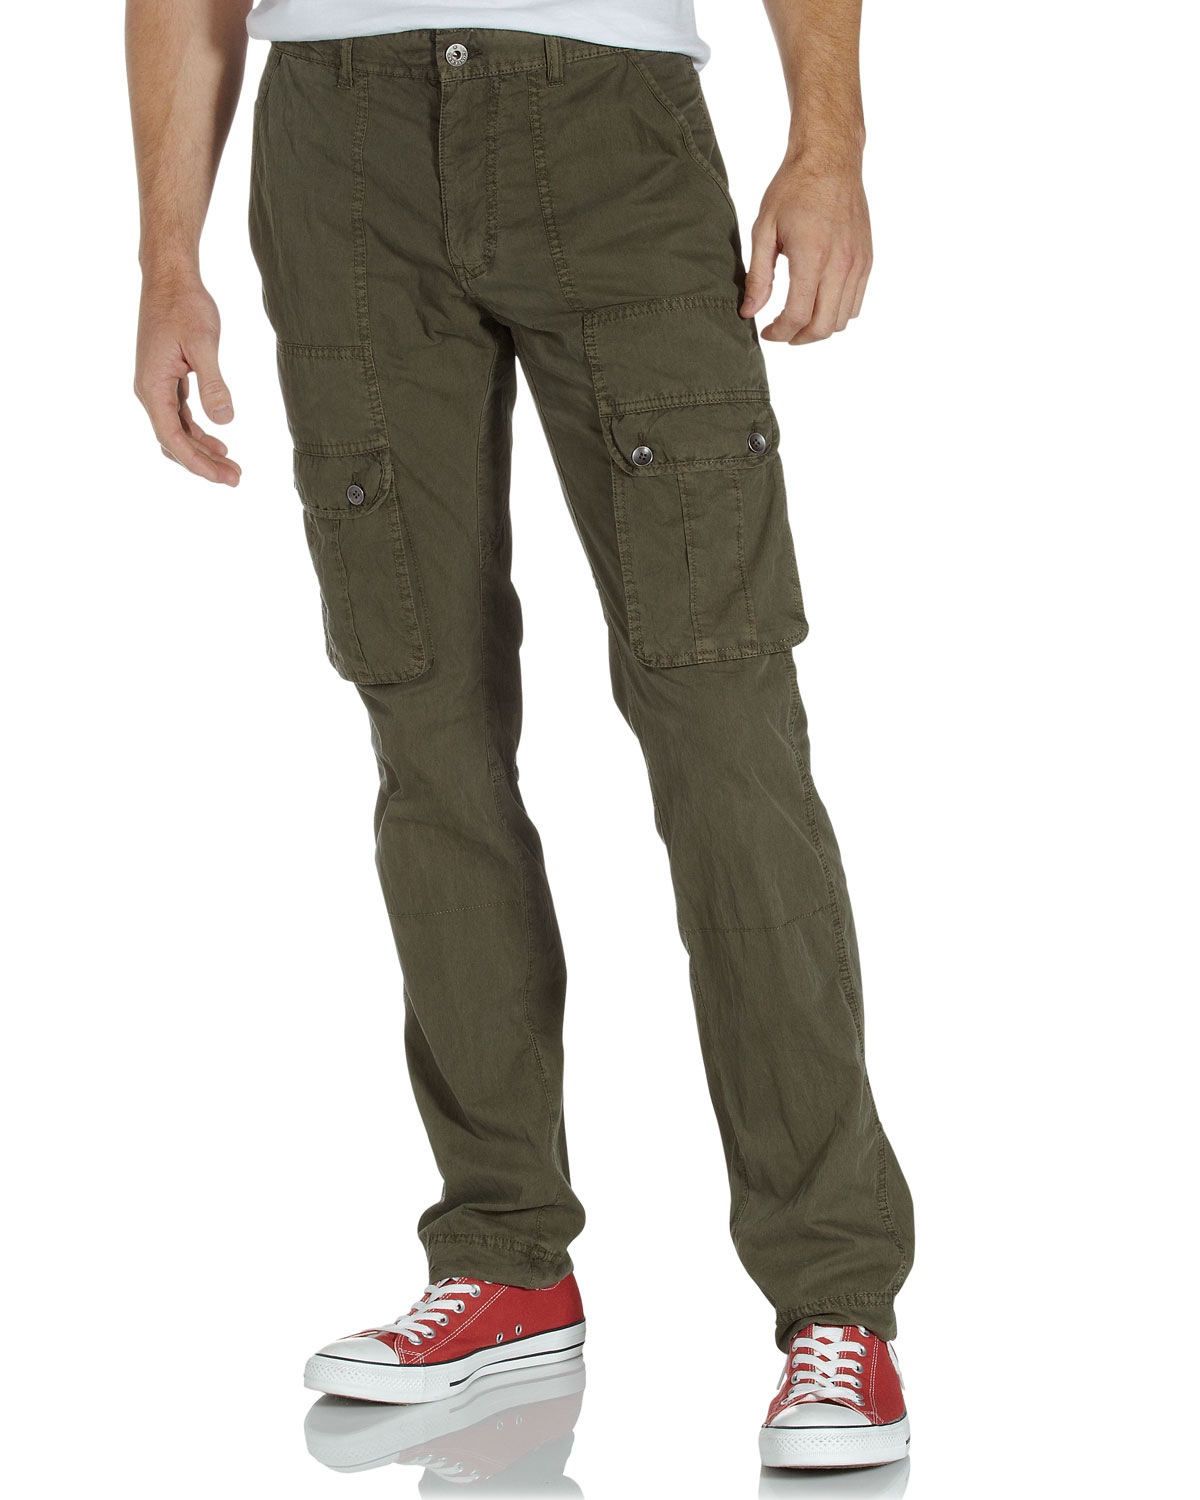 Lyst - Converse Cargo Pants in Green for Men